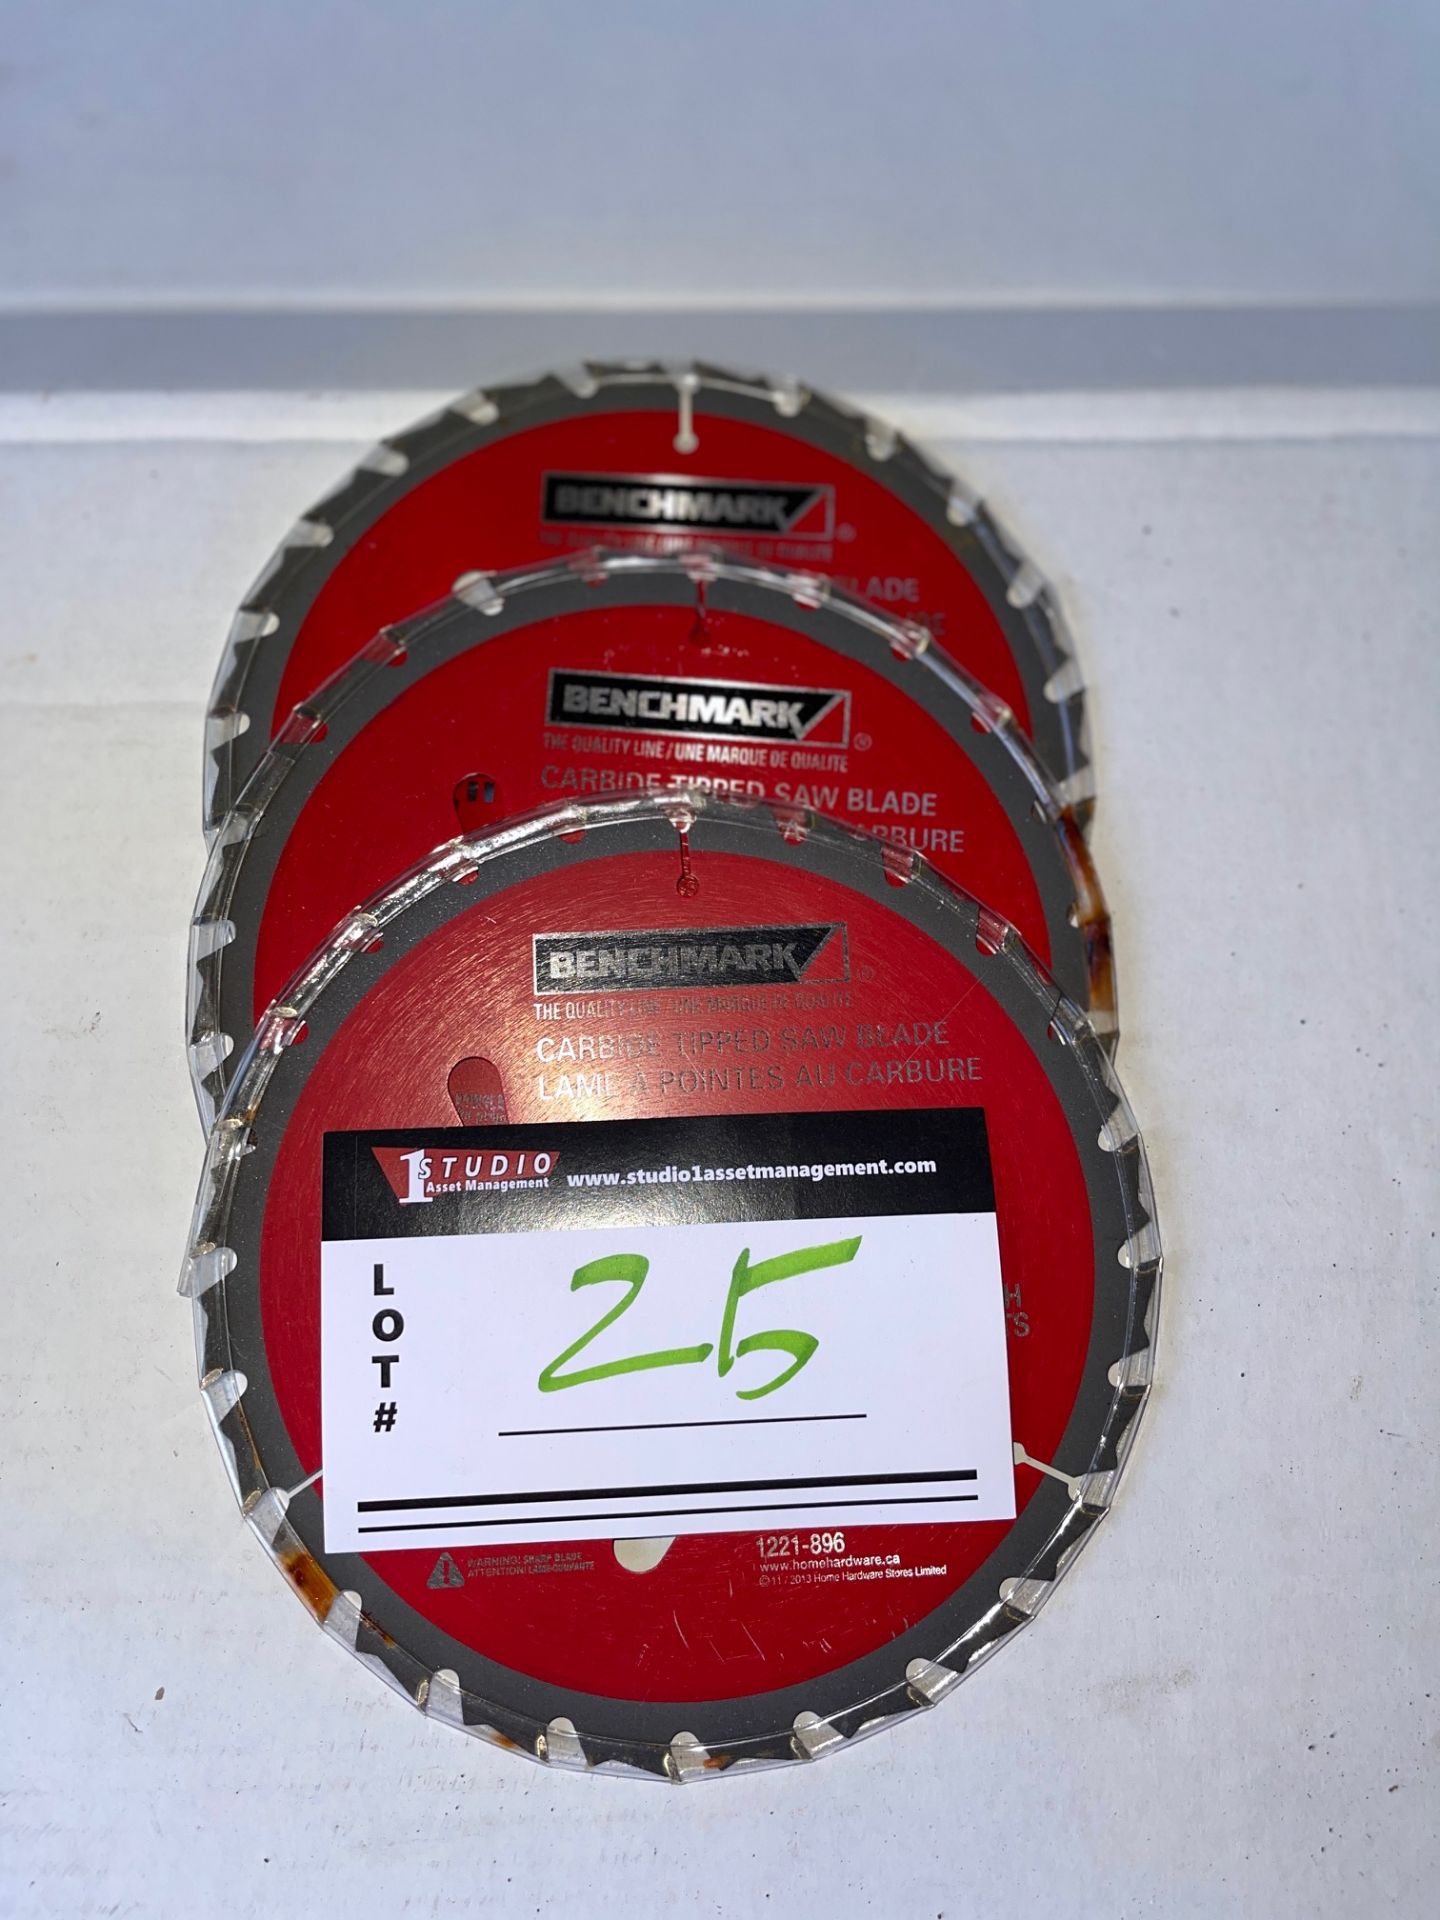 LOT/CARBIDE TIP SAW BLADES 7 1/4", QTY 3 - Image 3 of 3